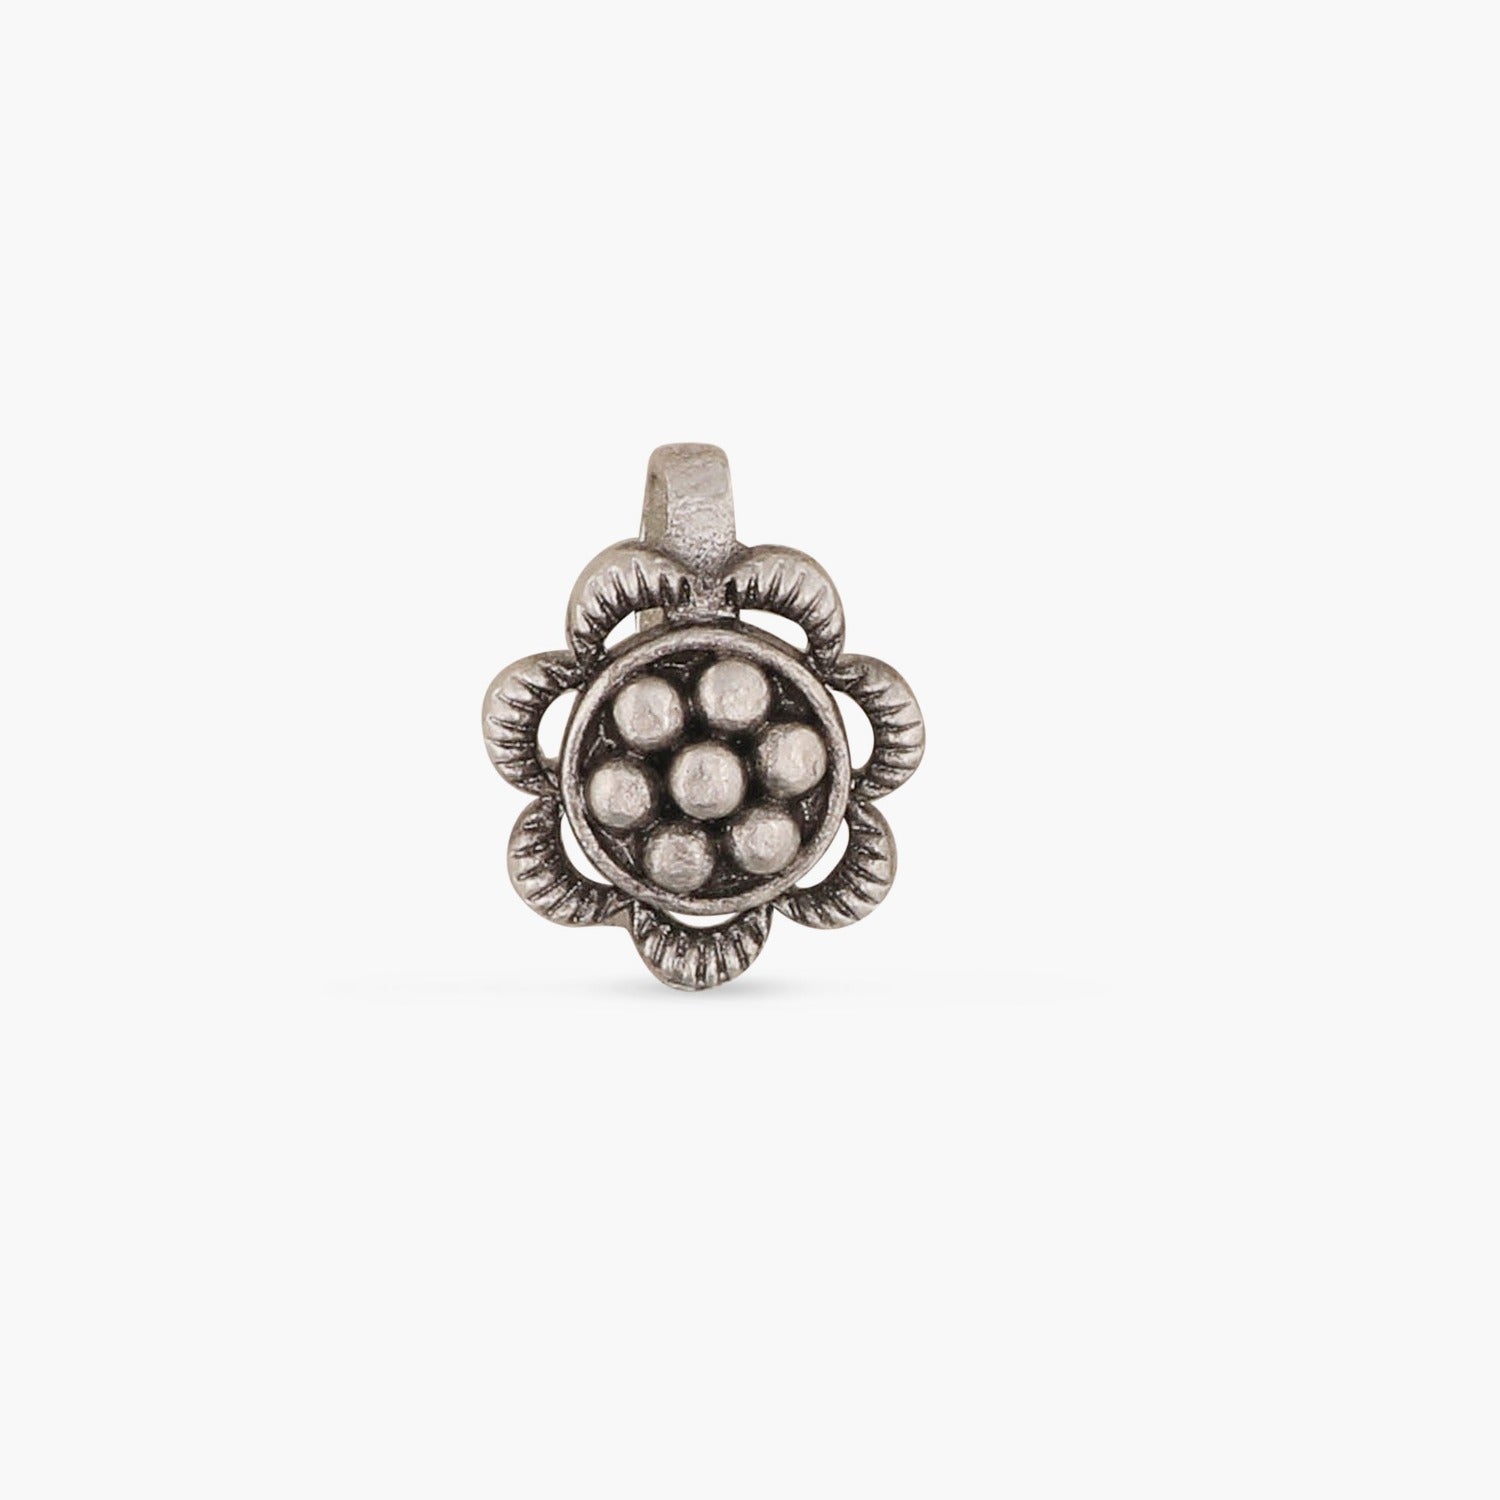 Maati Floral Statement Antique Oxidized Nose Pin